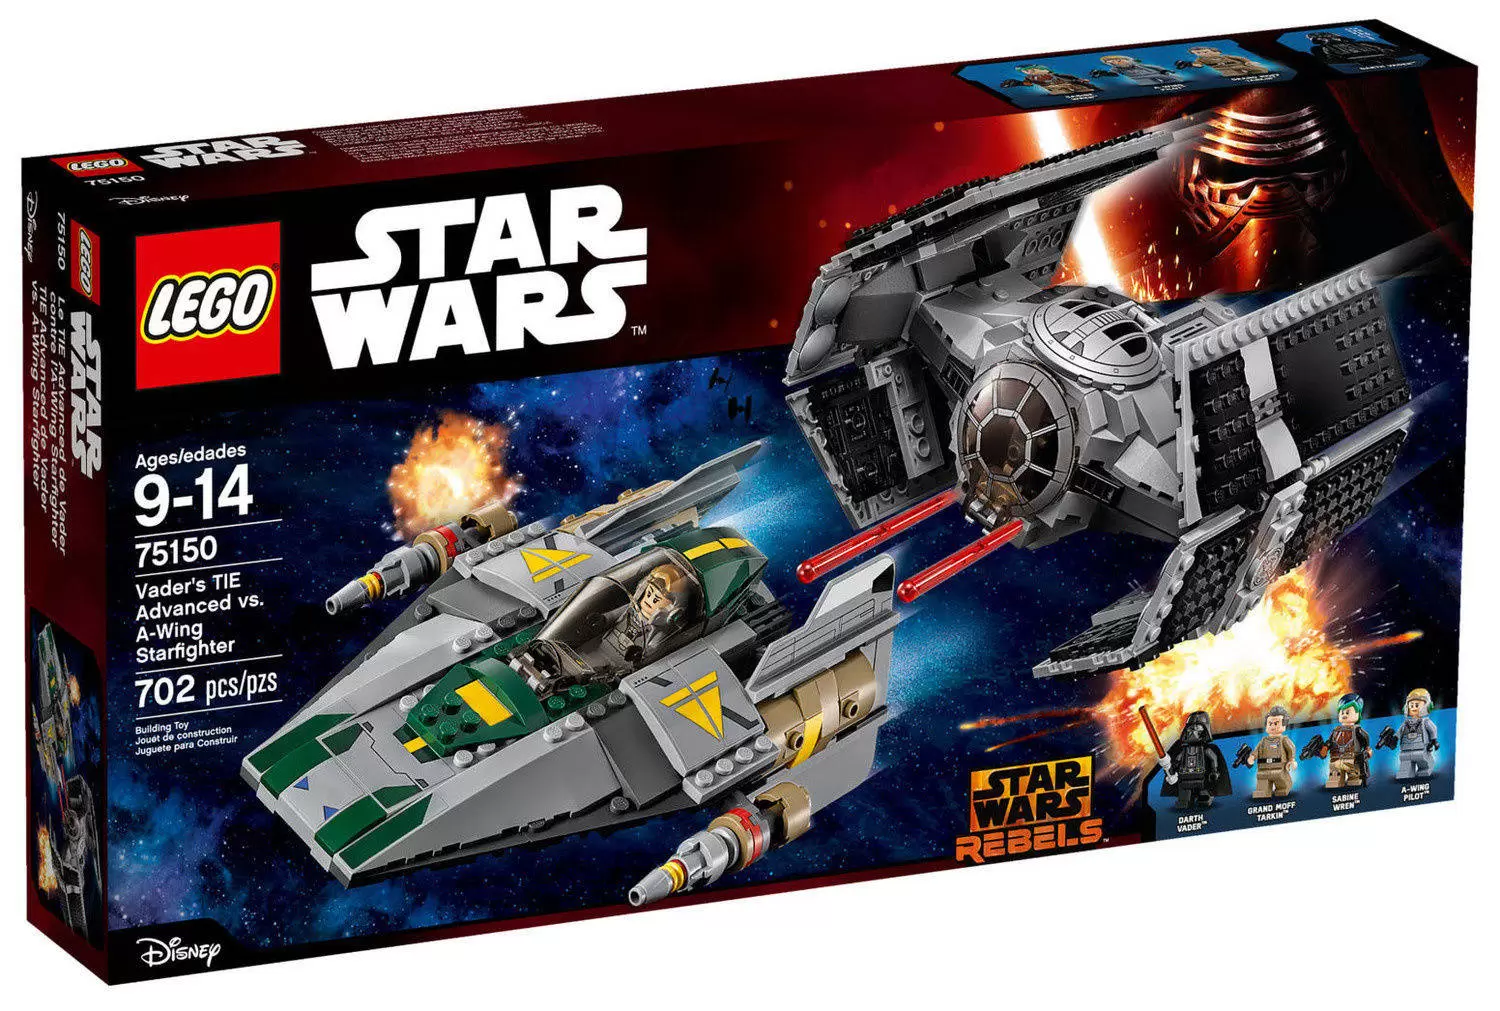 LEGO Star Wars - Vader\'s TIE Advanced vs. A-wing Fighter